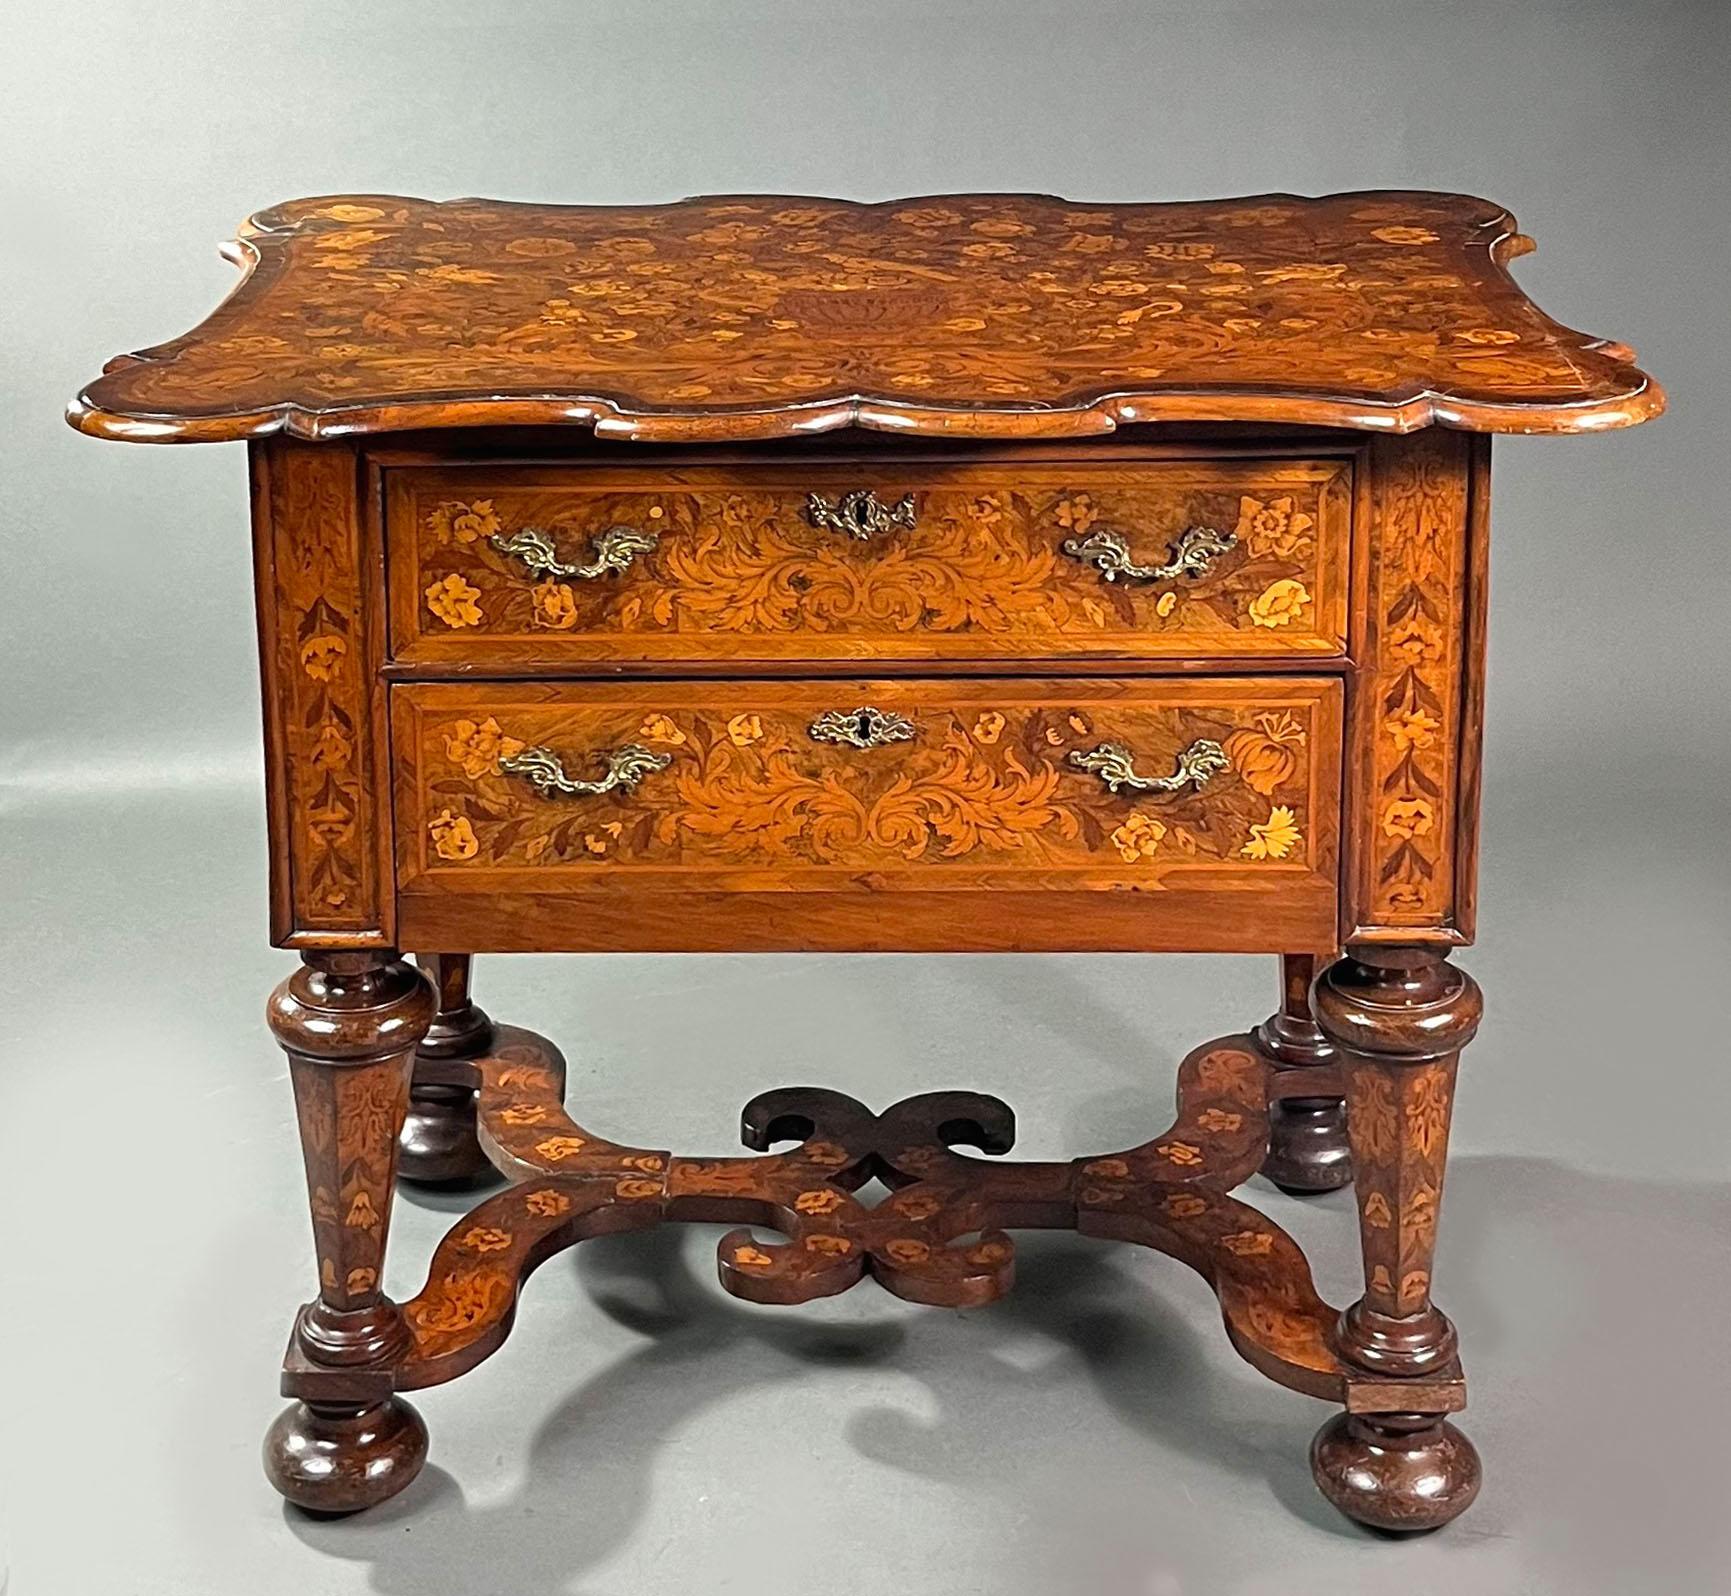 Dutch marquetry side table
Late 18th/early 19th Century figured walnut Dutch Baroque side table, with fine marquetry inlay of birds and foliage, handsome X-stretcher and oak lined drawers